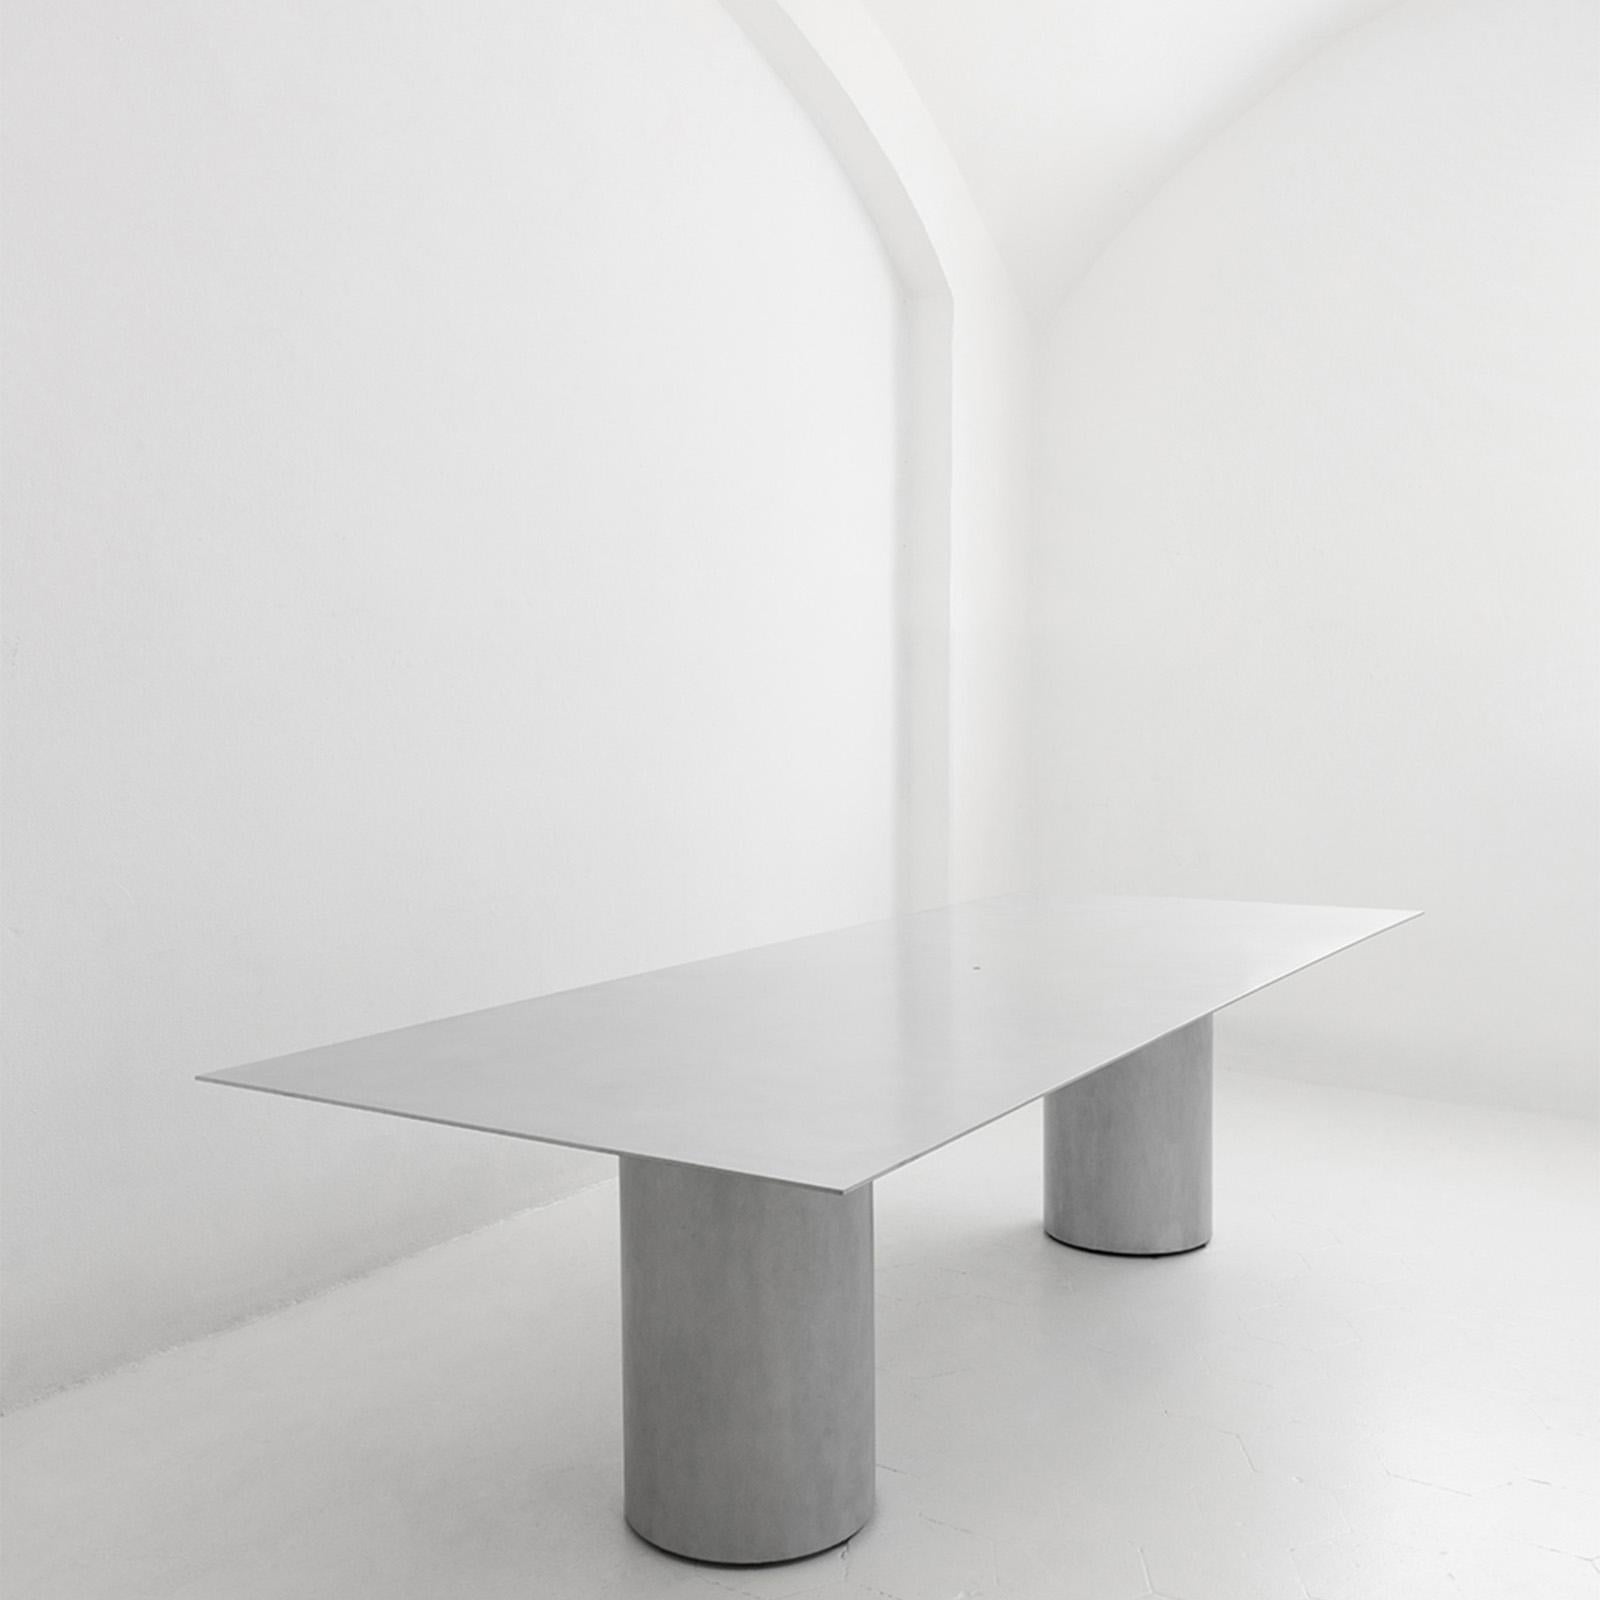 The main feature of the table is the result of its construction, allowing the top a minimum thickness of 6 mm, exploiting the qualities and properties of aluminum.

Materials: Aluminium and stainless steel. Edition: Rossana Orlandi 8 pieces + 1